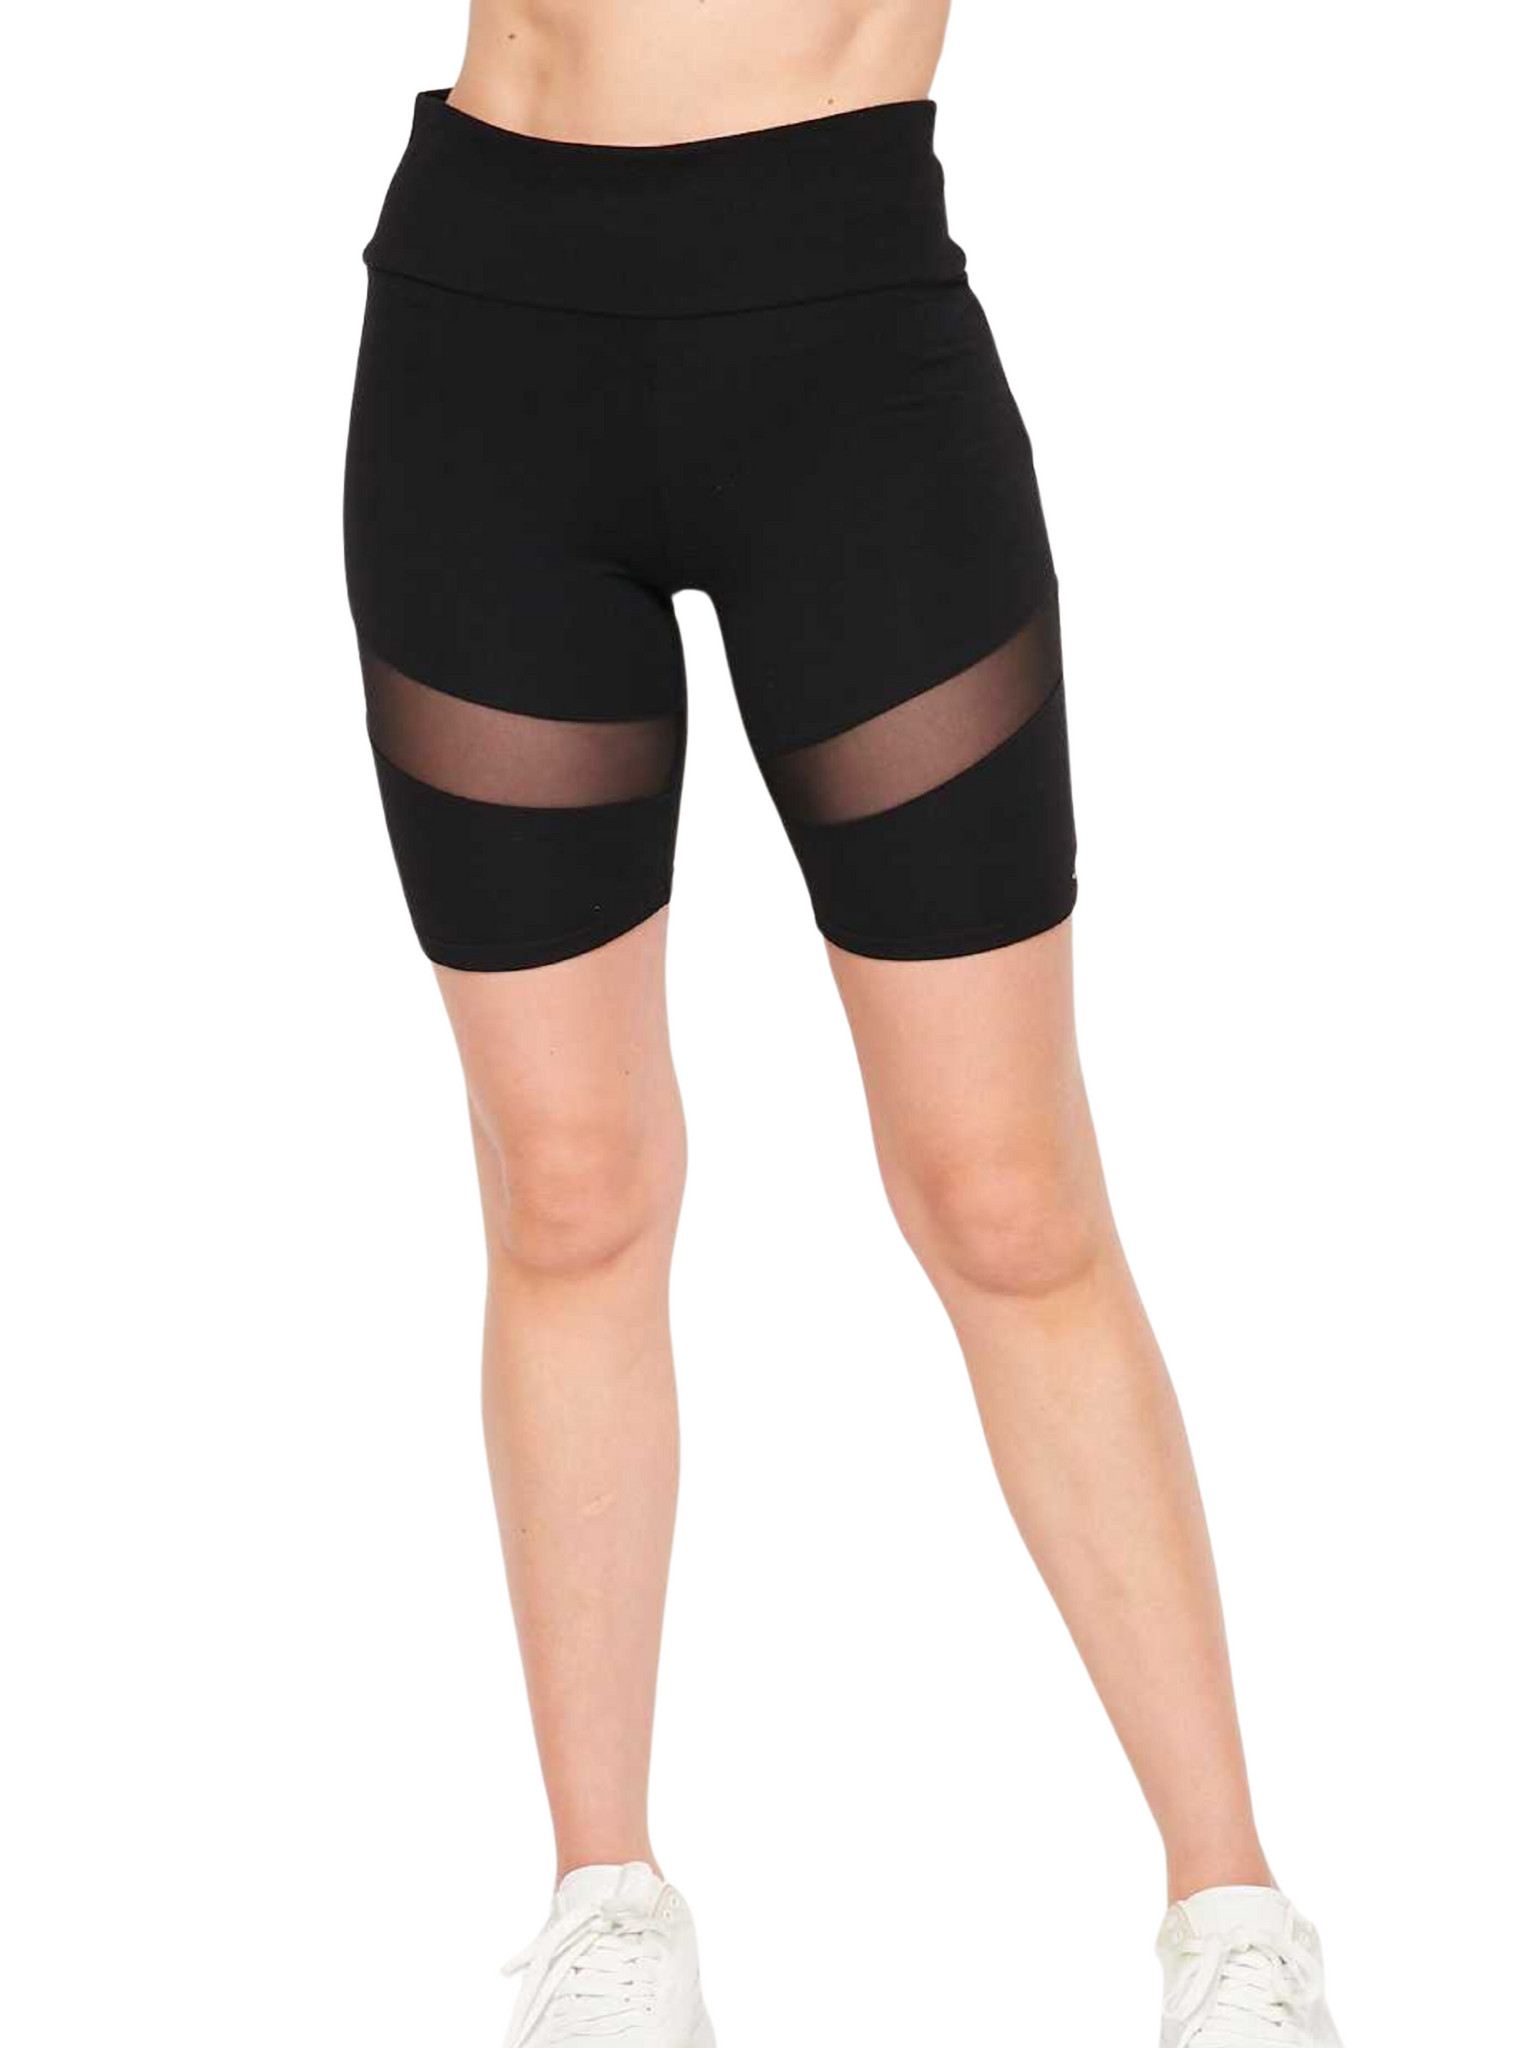 Black Meshed Biker Shorts - touchofsouth